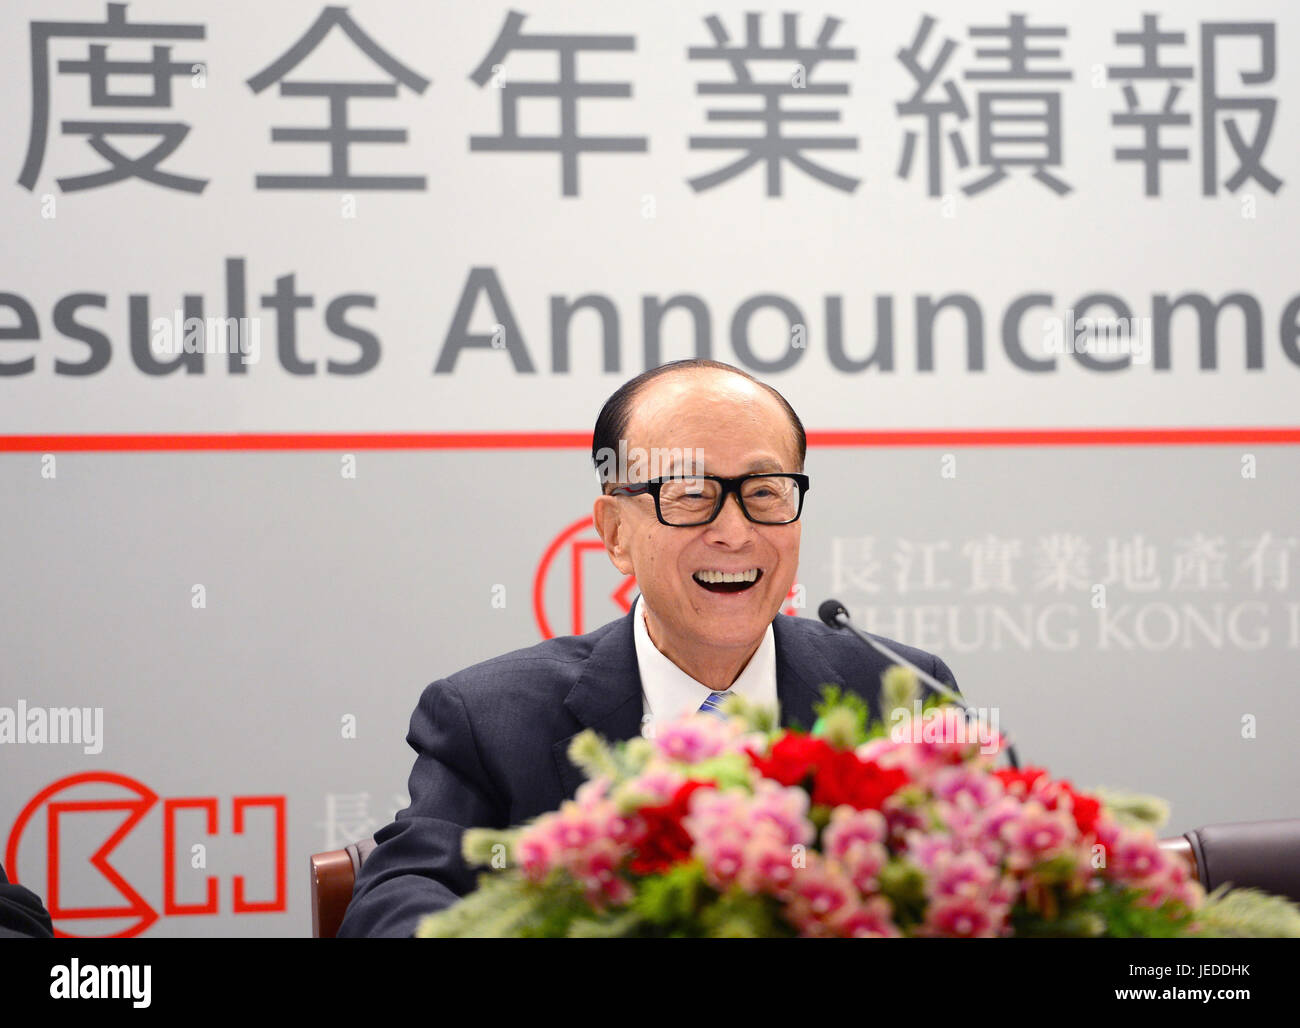 (170624) -- HONG KONG, June 24, 2017 (Xinhua) -- Photo taken on March 17, 2016 shows Hong Kong tycoon Li Ka-shing attending a news conference to announce his CK Hutchison Holdings company's annual results in Hong Kong, south China. Li had an exclusive interview with Xinhua News Agency lately as the 20th anniversary of Hong Kong's return to China is drawing near. (Xinhua/Qin Qing)(wjq) Stock Photo